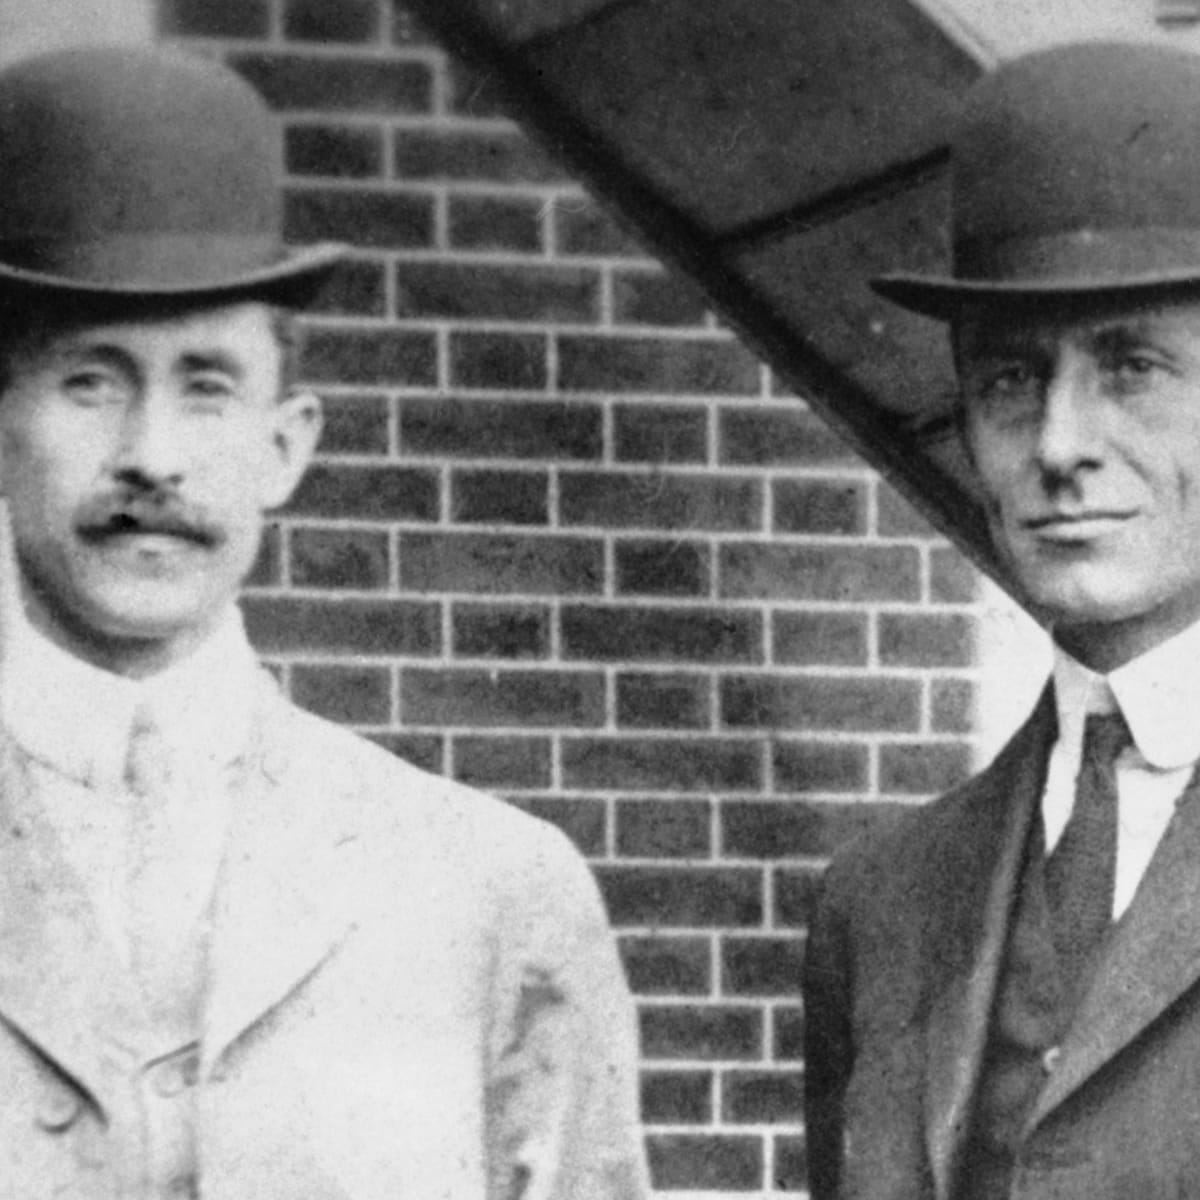 Orville and Wilbur Wright: The Brothers Who Changed Aviation - Biography